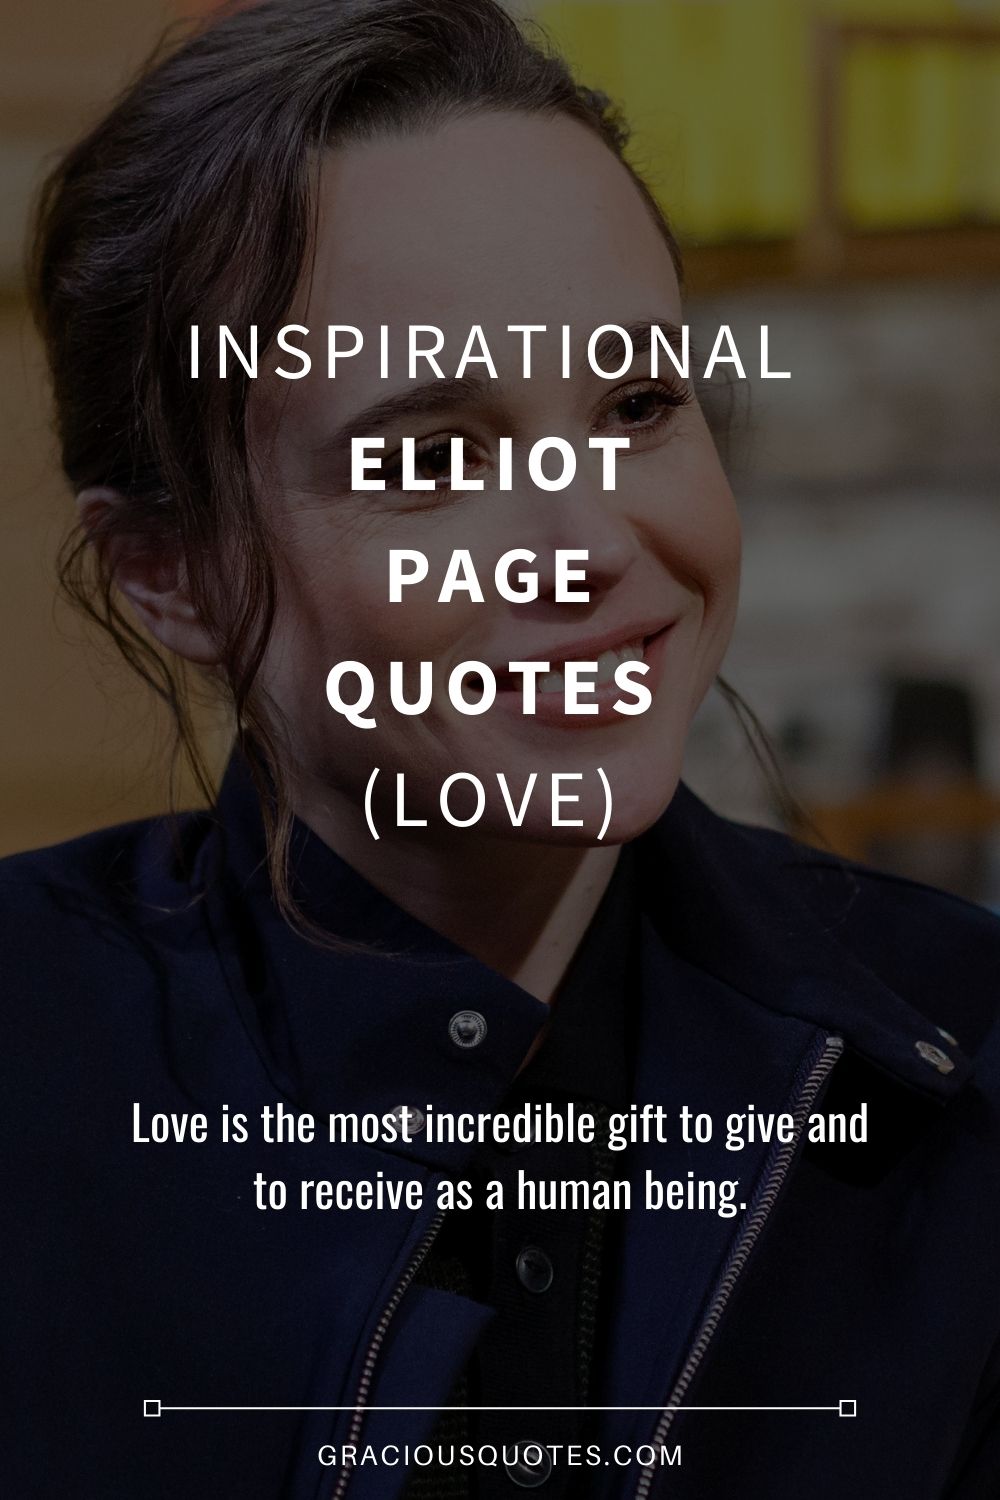 Inspirational Elliot Page Quotes (LOVE) - Gracious Quotes